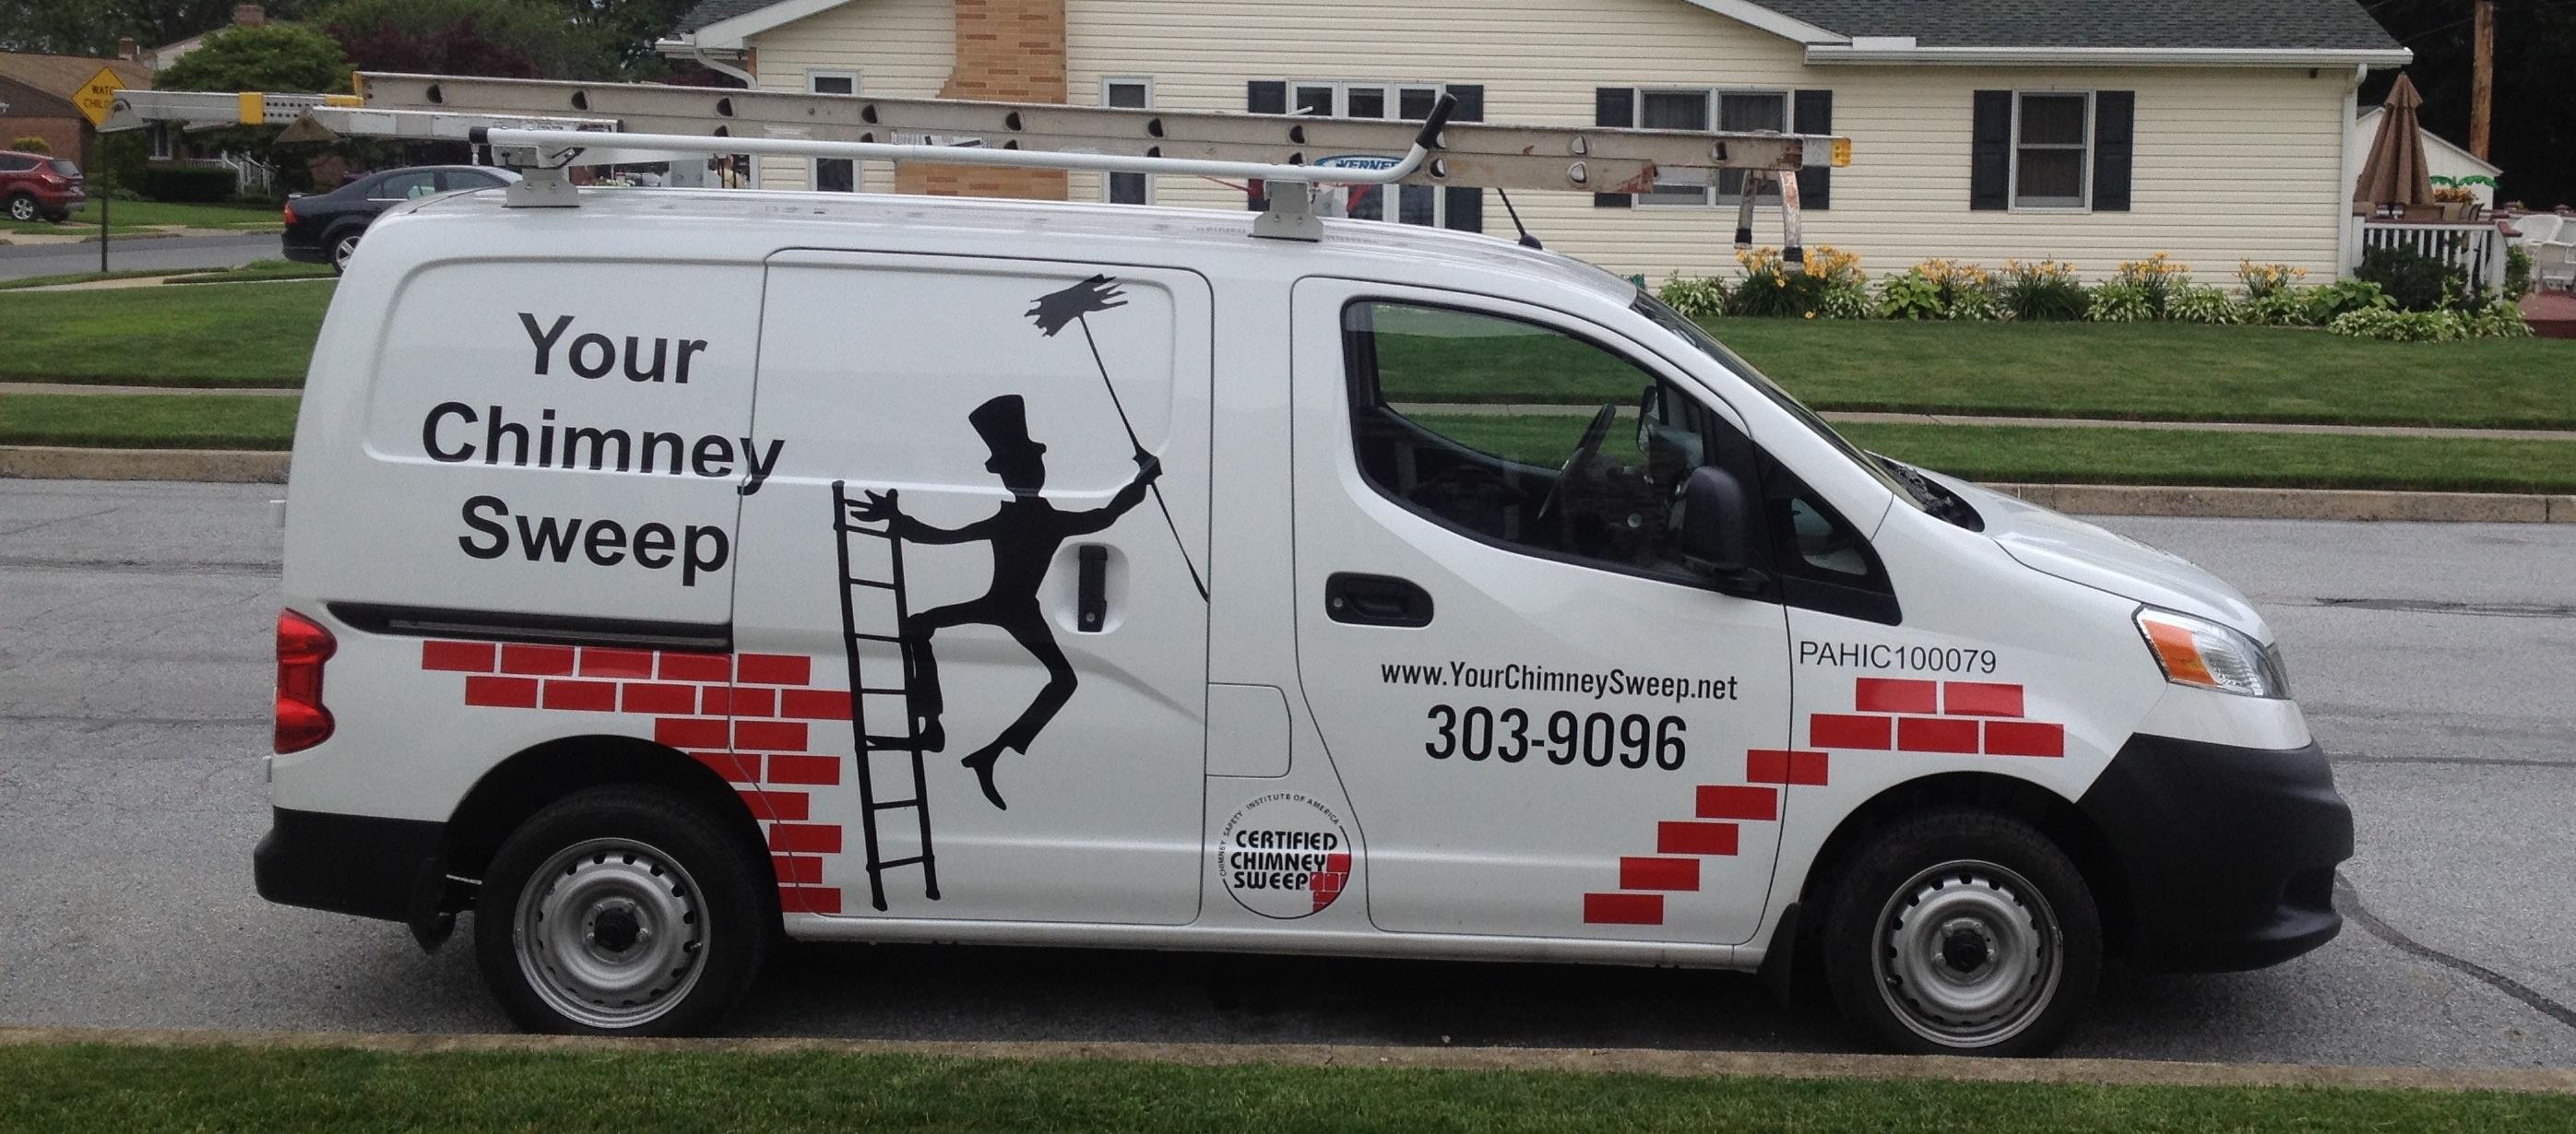 Your Chimney Sweep Coupons near me in Mechanicsburg | 8coupons